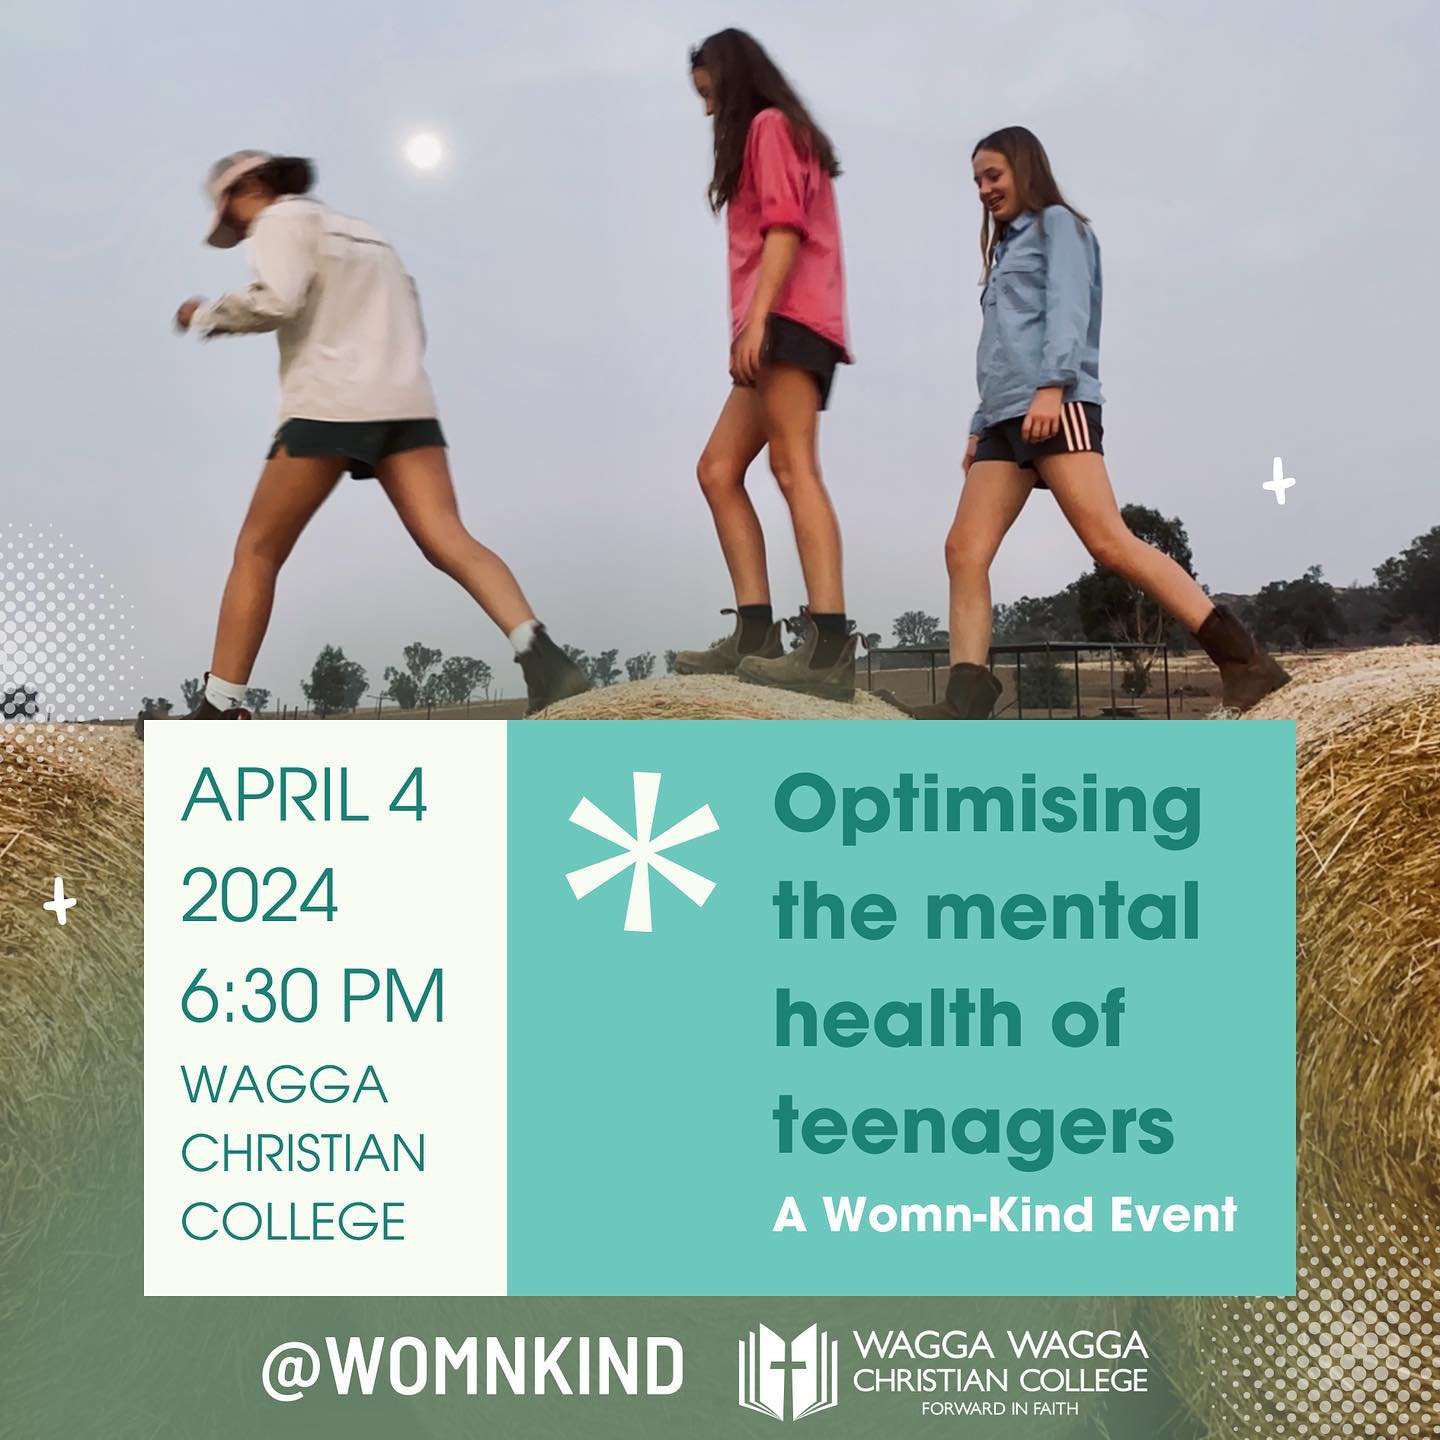 We are coming back to Wagga in April and will be delivering another seminar for parents, carers, educators and community leaders!

This event will provide an insight into the current context of youth mental health in Australia and offer valuable tips